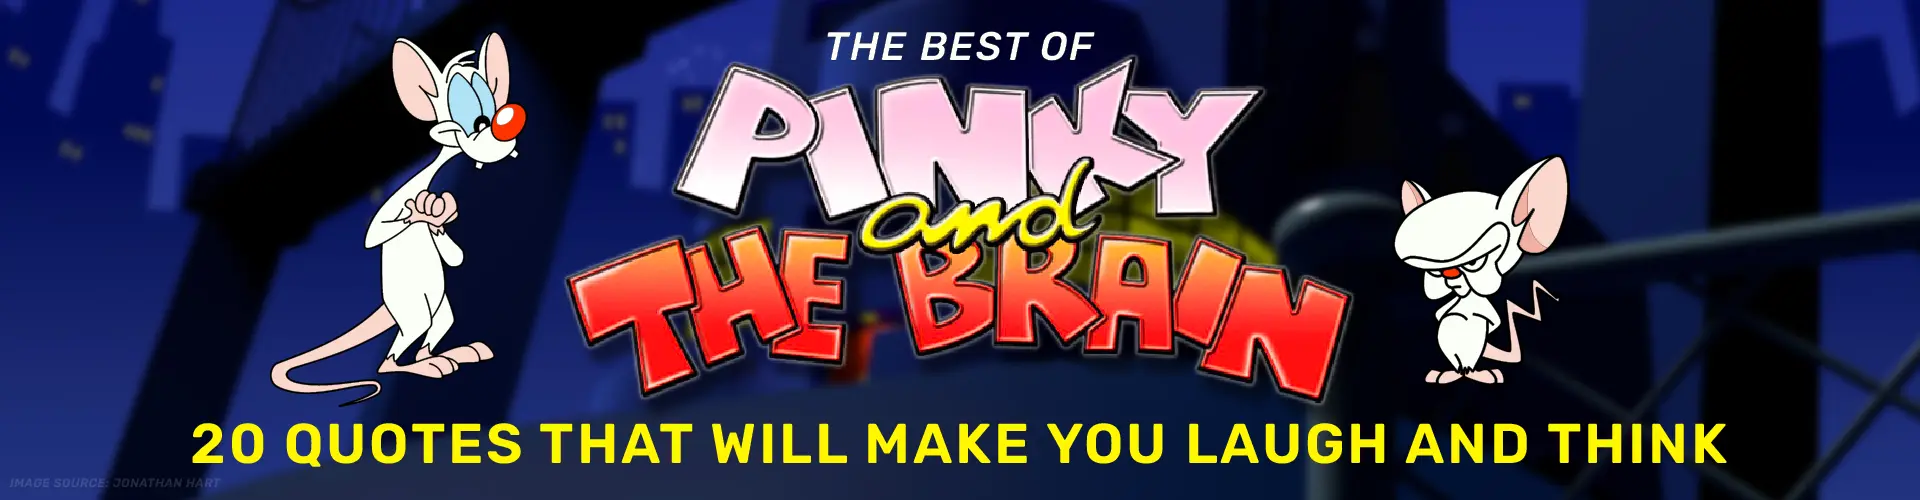 Best of Pinky and the Brain